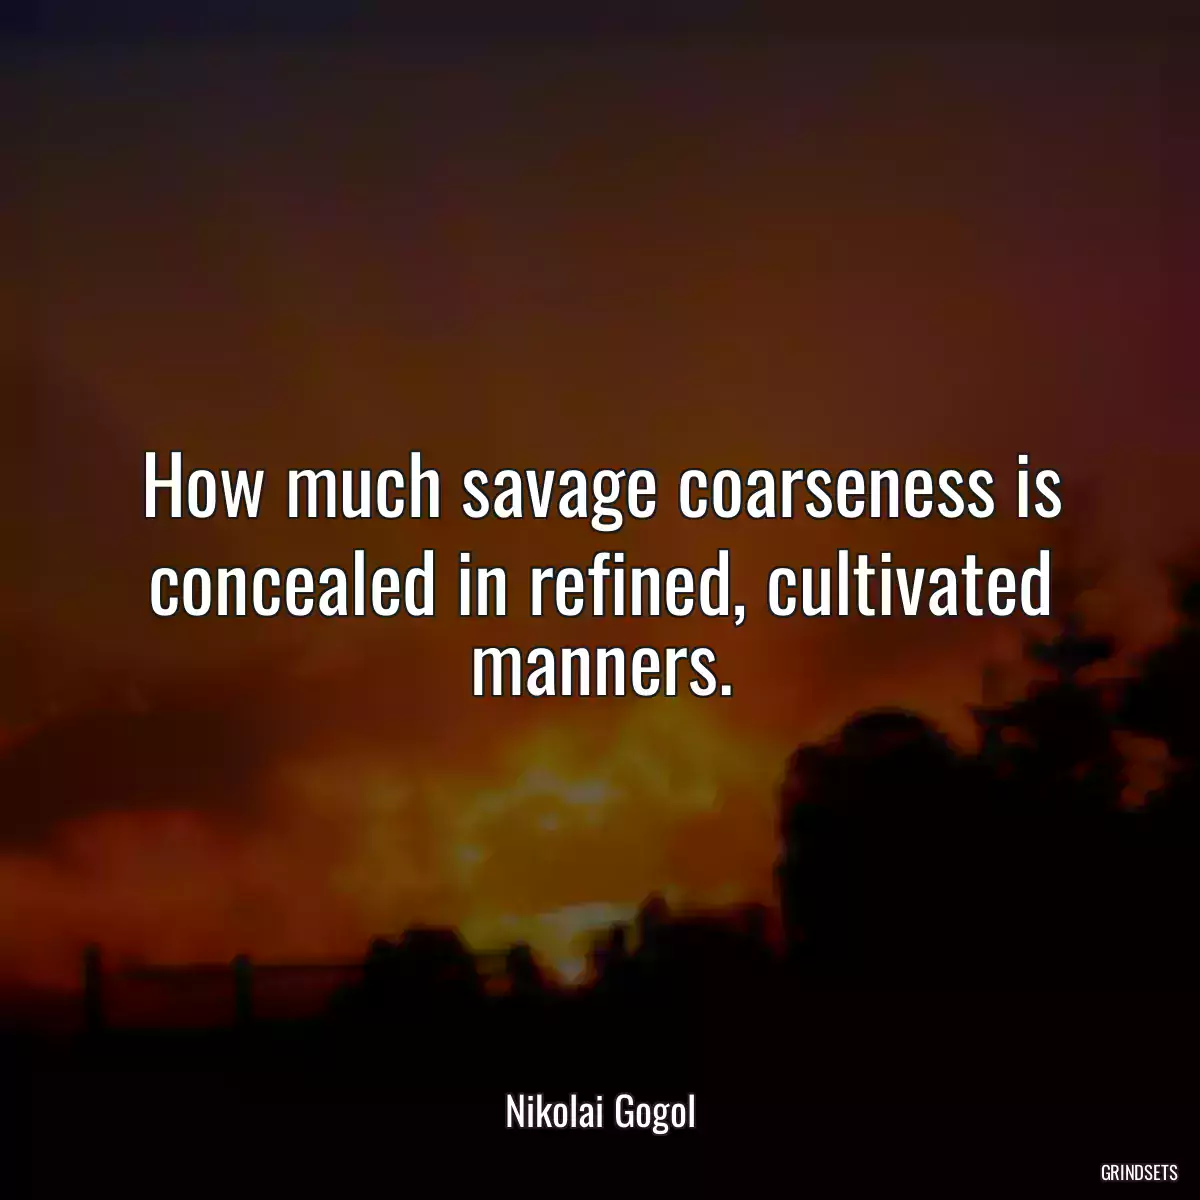 How much savage coarseness is concealed in refined, cultivated manners.